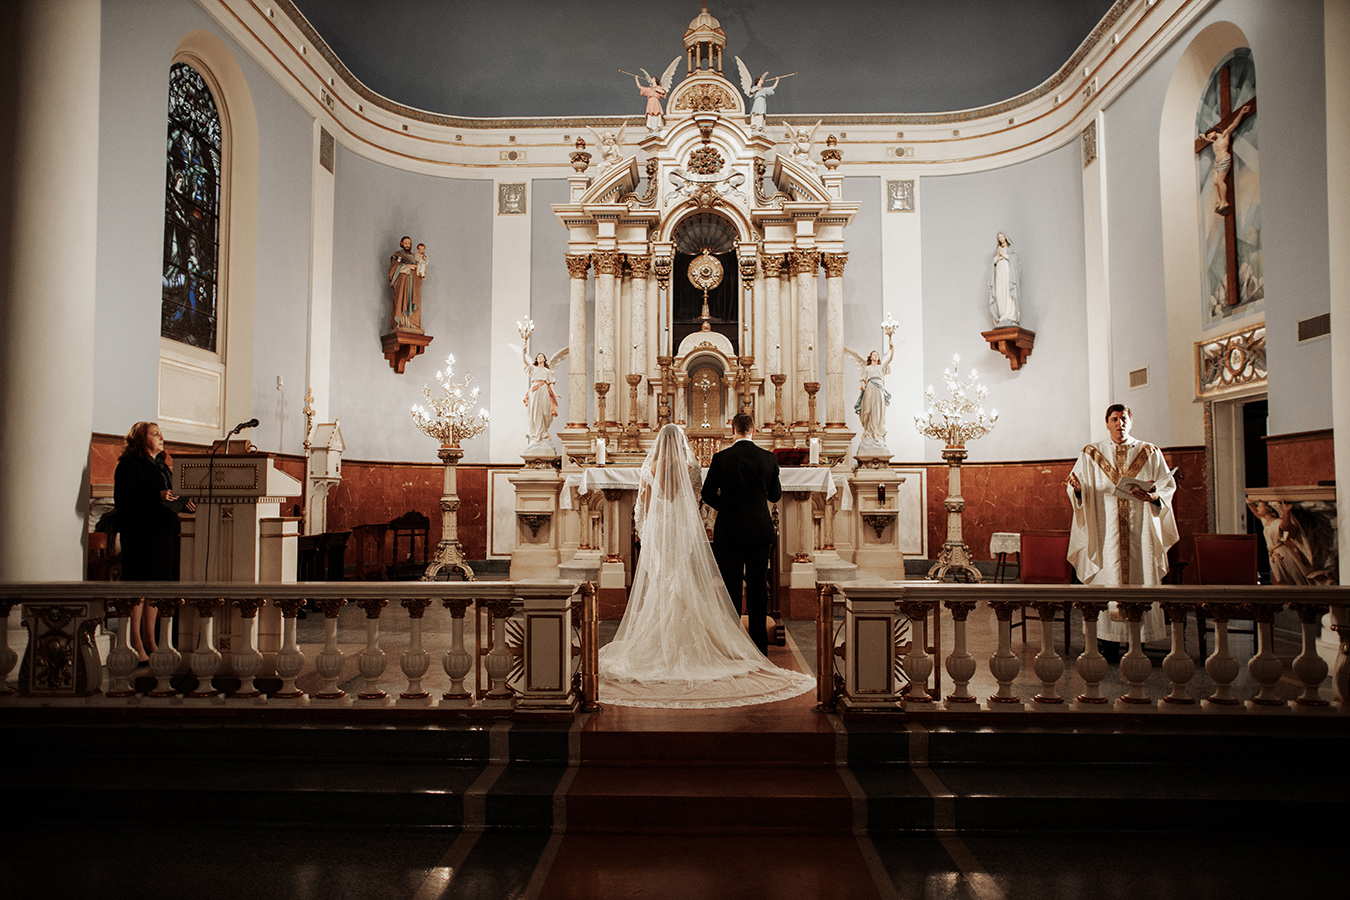 Rebecca wore a cathedral length lace mantilla veil for the traditional Catholic wedding ceremony at St. Mary’s Italian Church, one of the oldest churches in New Orleans, on Chartres Street.